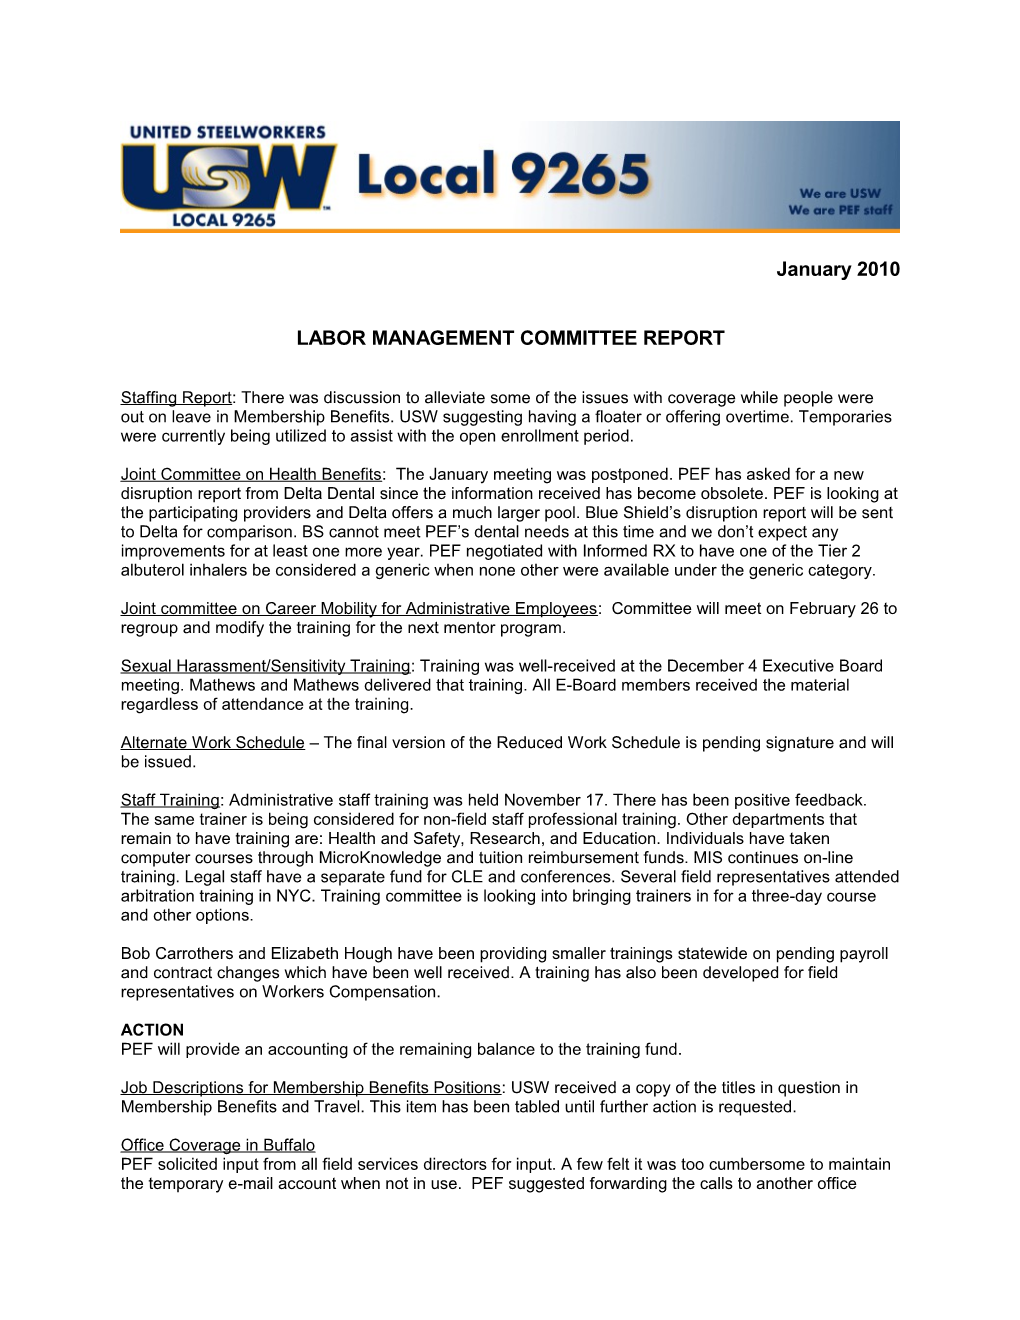 Labor Management Committee Report